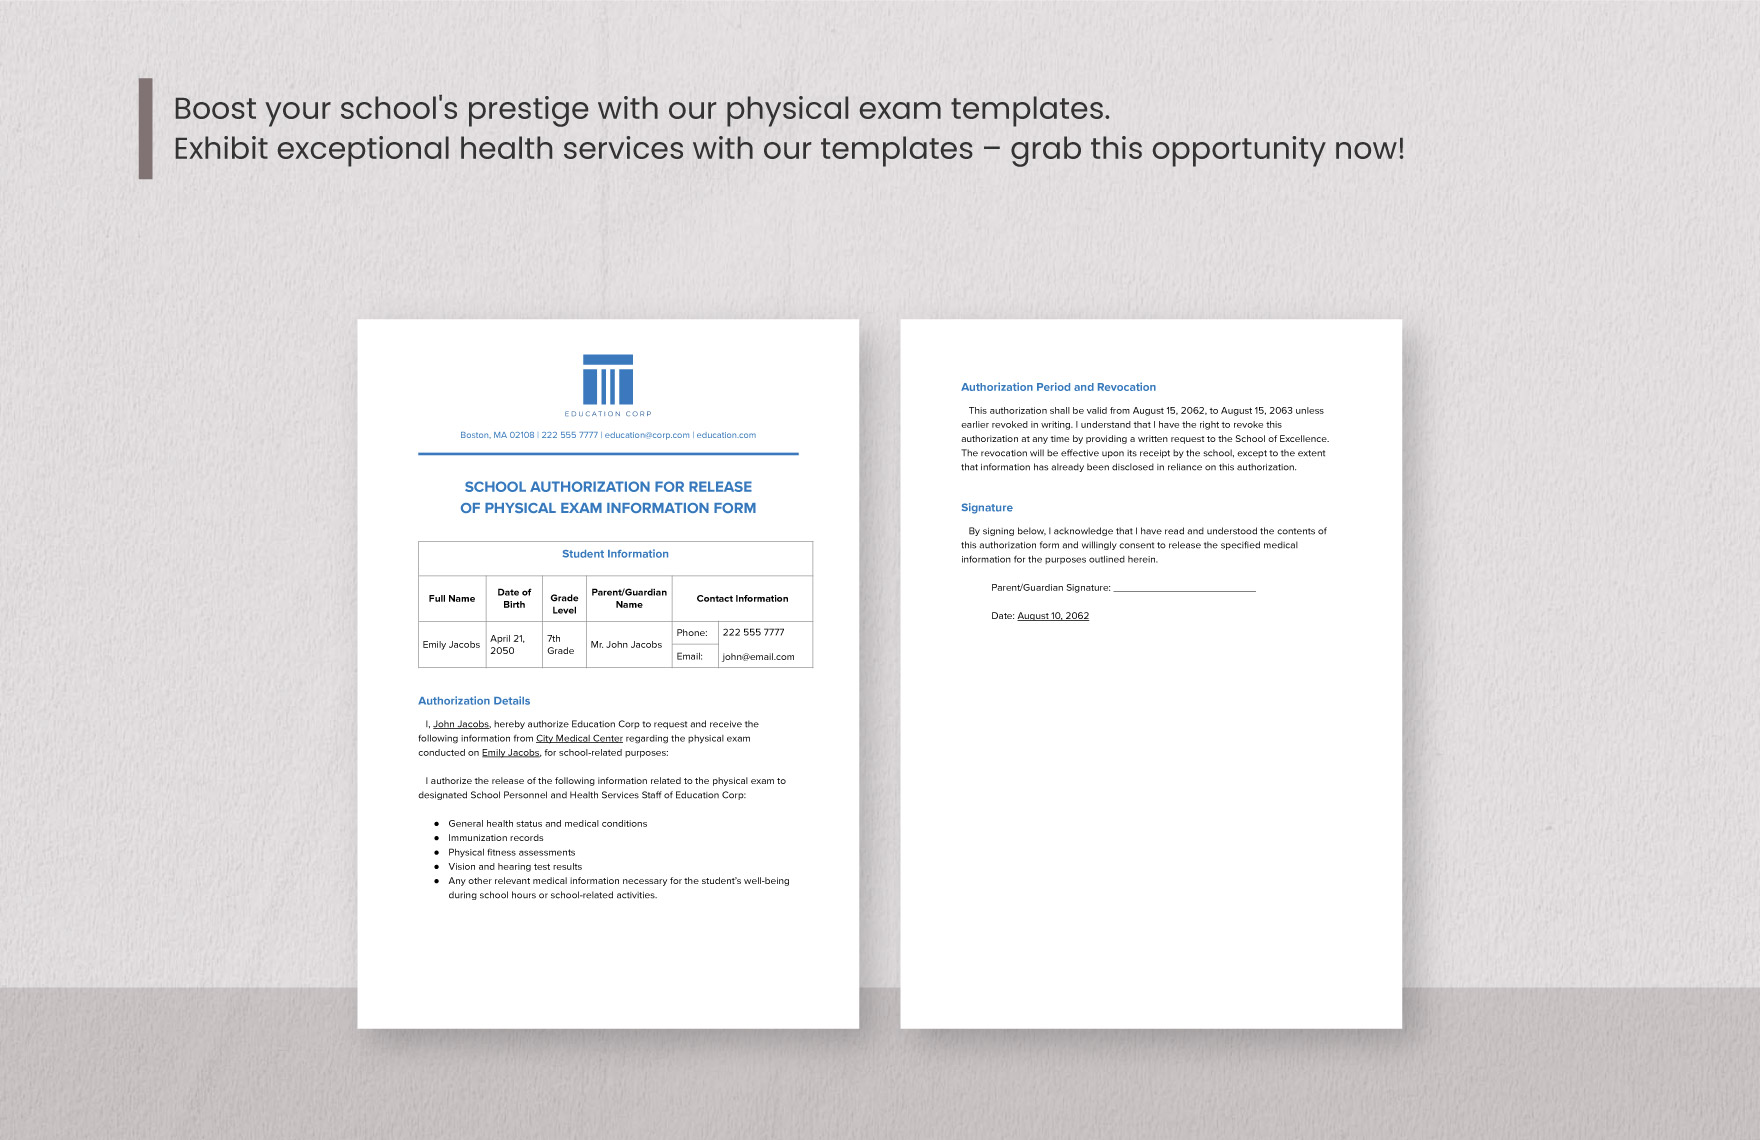 School Authorization for Release of Physical Exam Information Form Template